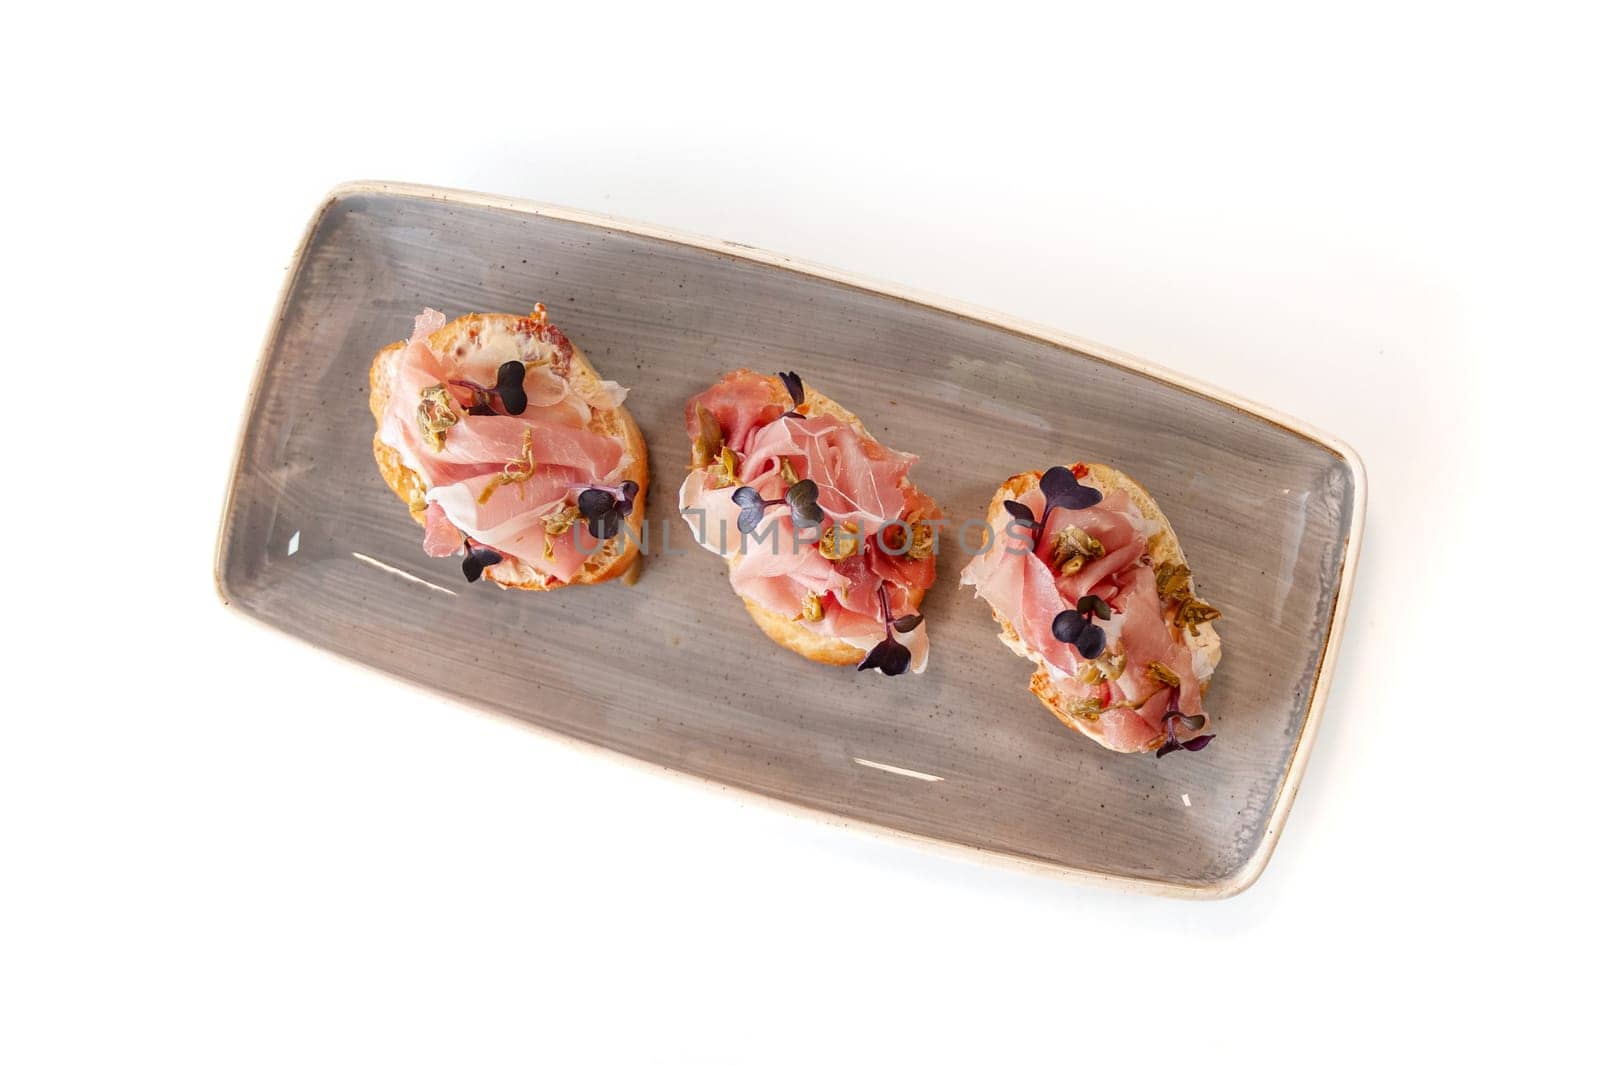 Bruschetta with prosciutto, capers and sun-dried tomatoes on ciabatta toast isolated. High quality photo